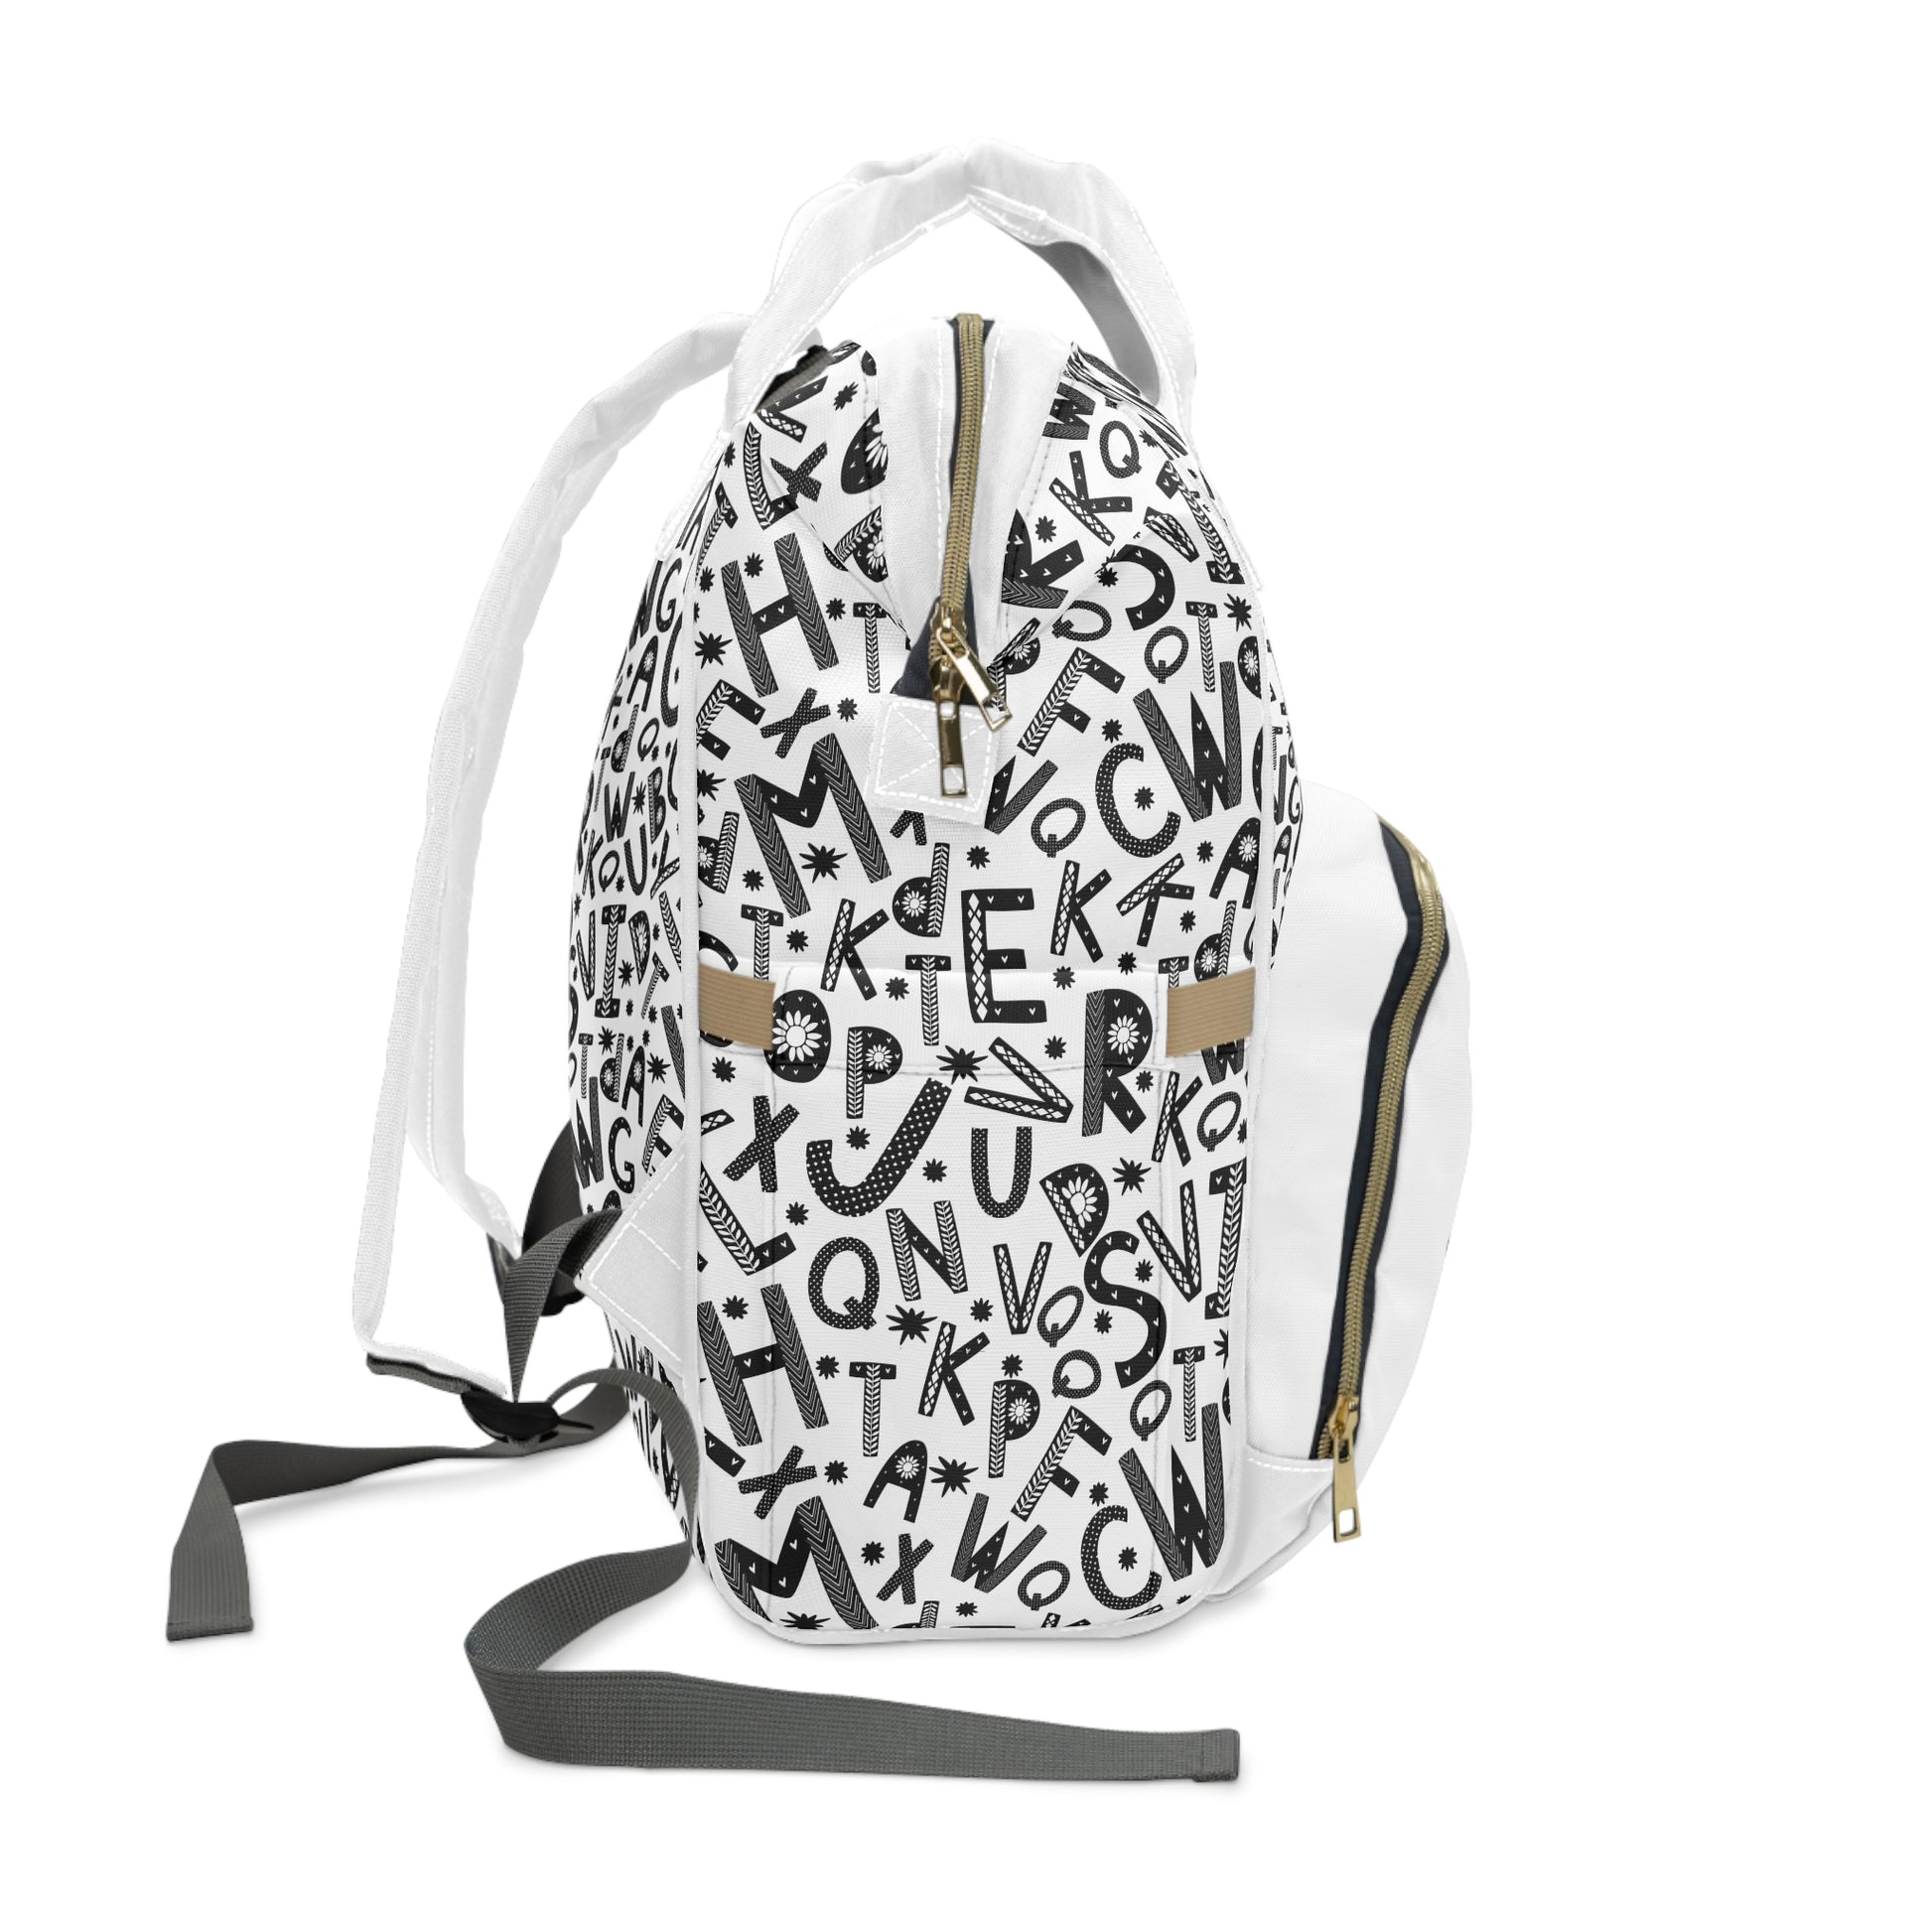 Doodle Alphabets Pattern Diaper Bag, Diaper Bag Backpack, Baby Diaper Bags, Baby Shower Gifts